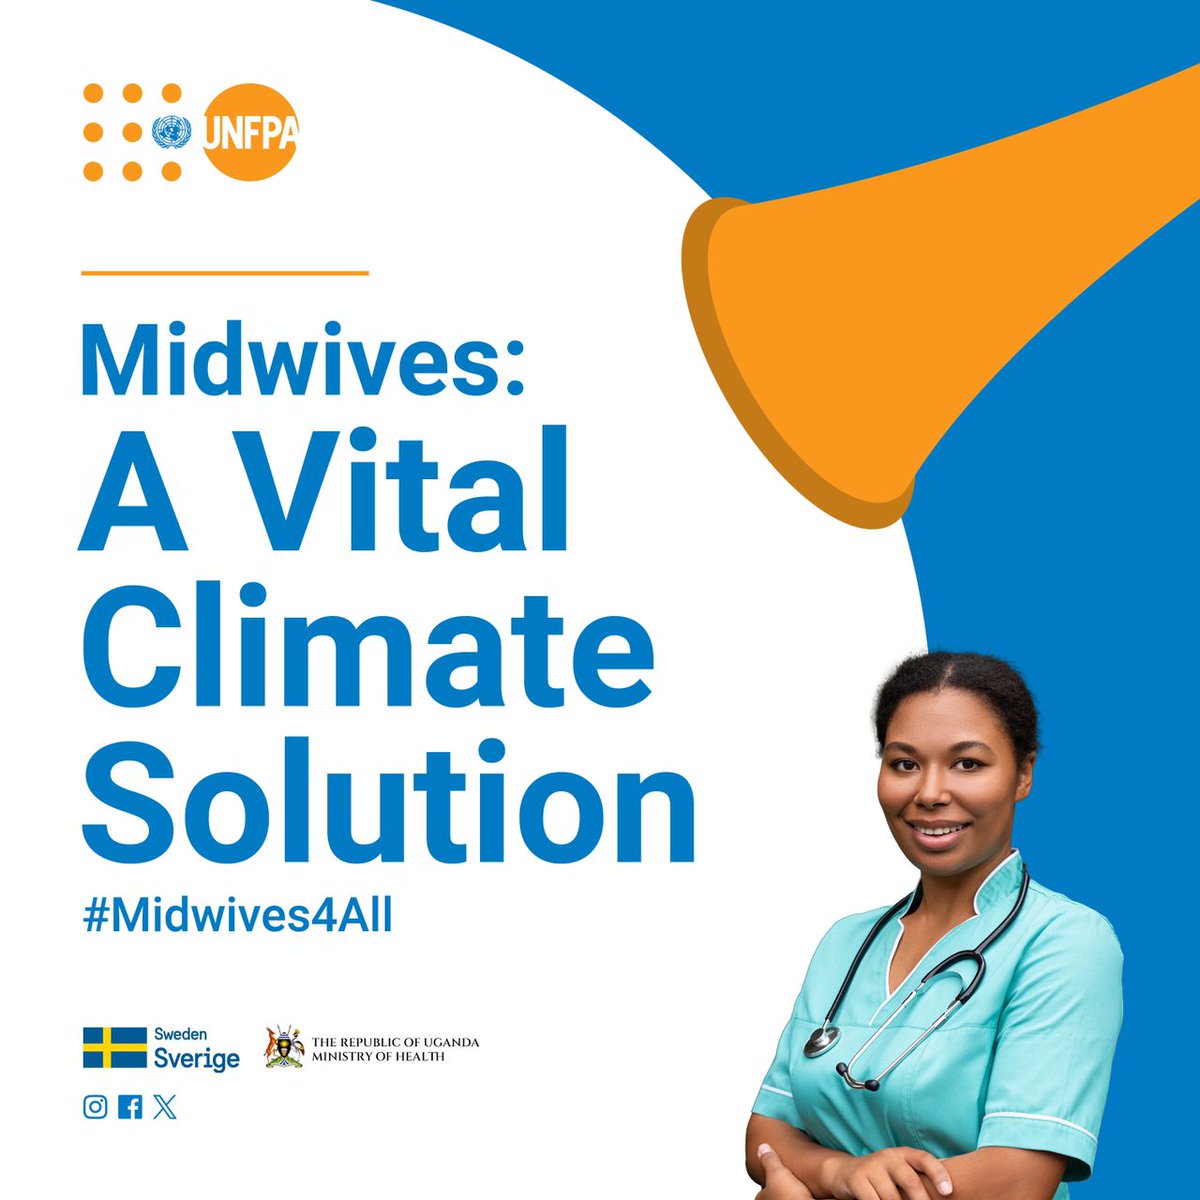 One of the greatest inputs from Mid-wives is the fact that they ensure safe births in hospitals and also educate the patients essential knowledge on sustainable healthcare acts.

#MidWIves4All